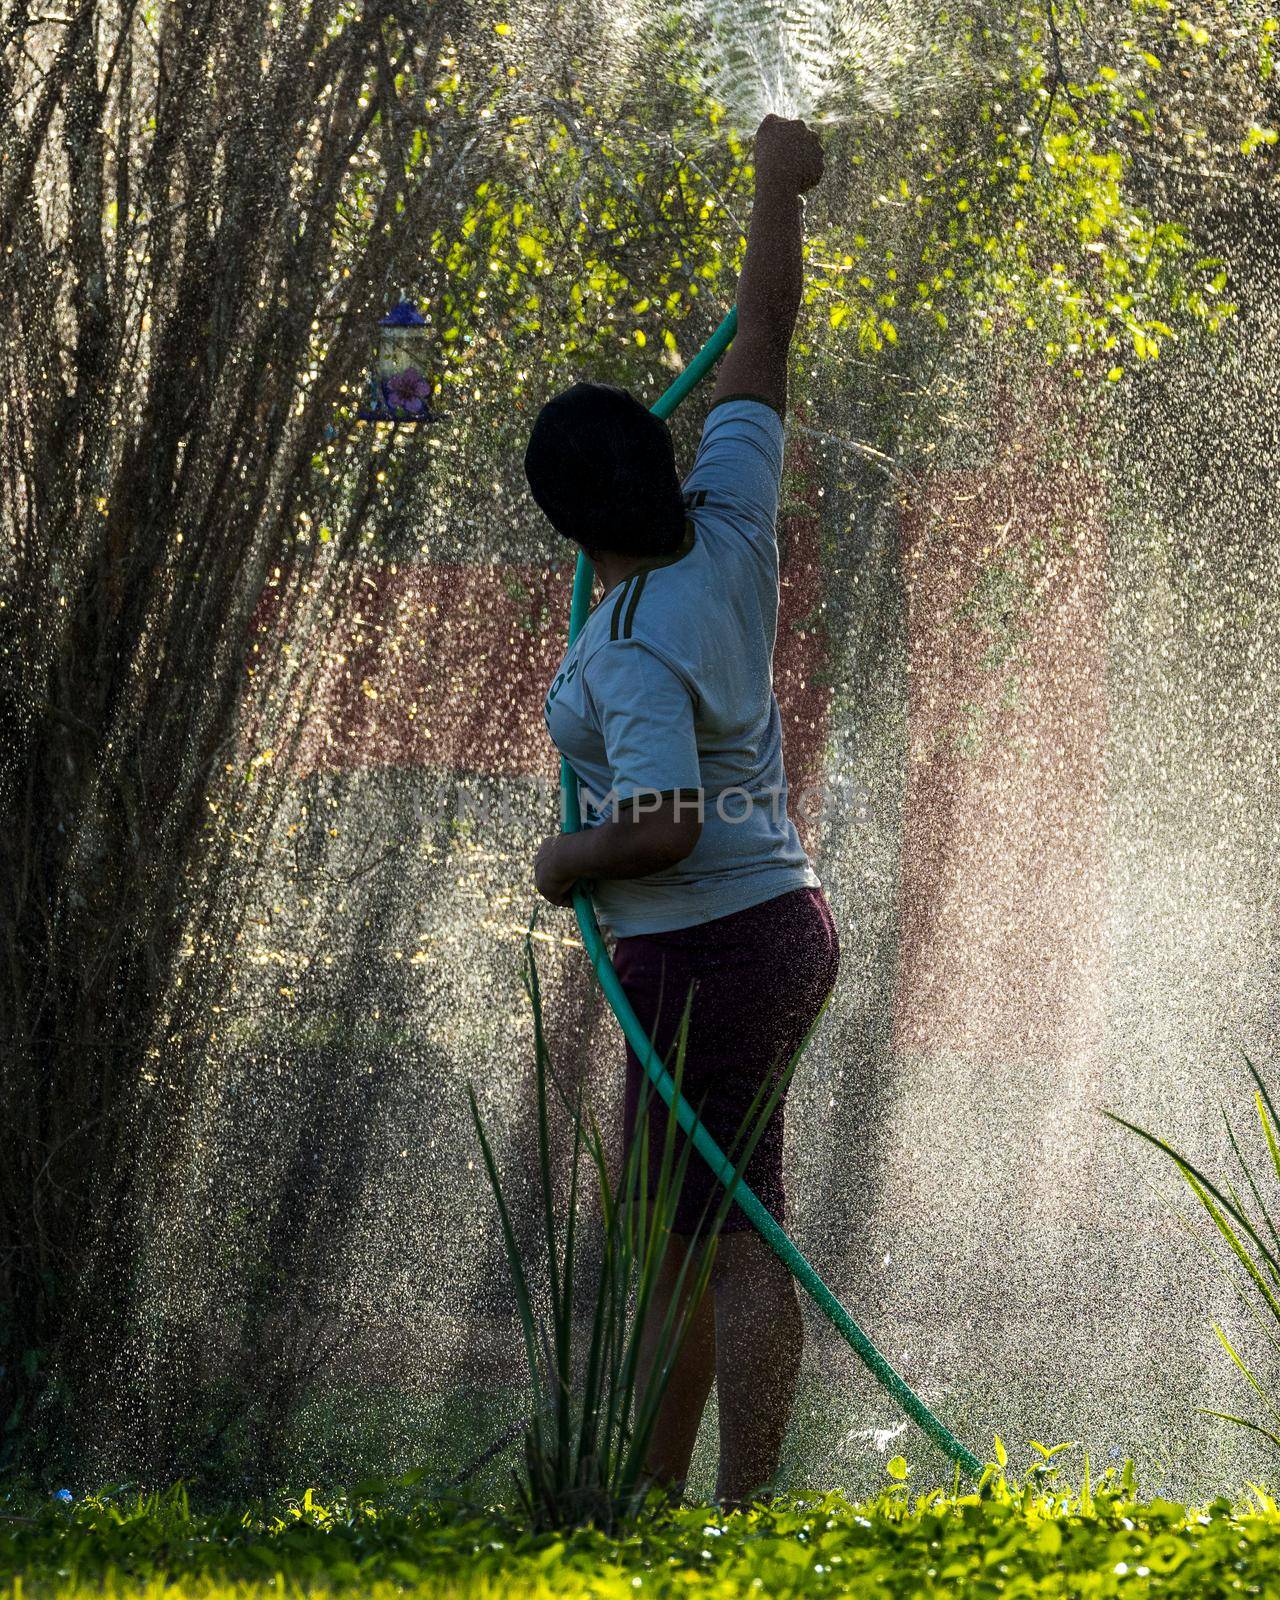 AQUIDAUAUNA, BRAZIL. JUNE 30, 2022: A young woman watering plants on an extremely hot day in Brazil.